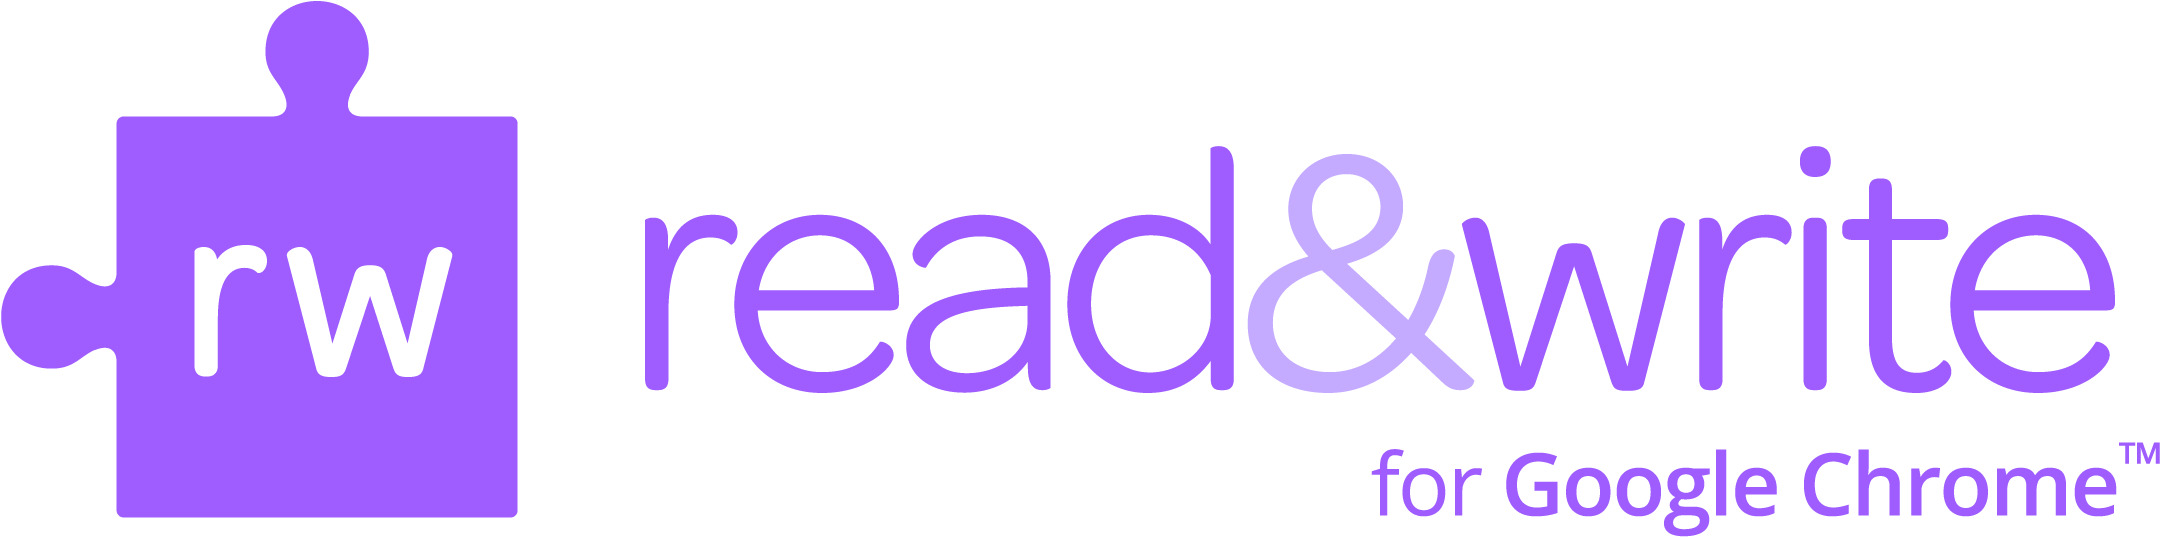 Read&Write's logo: a purple puzzle piece with "rw" inside. then it reads "read&write for Google Chrome"